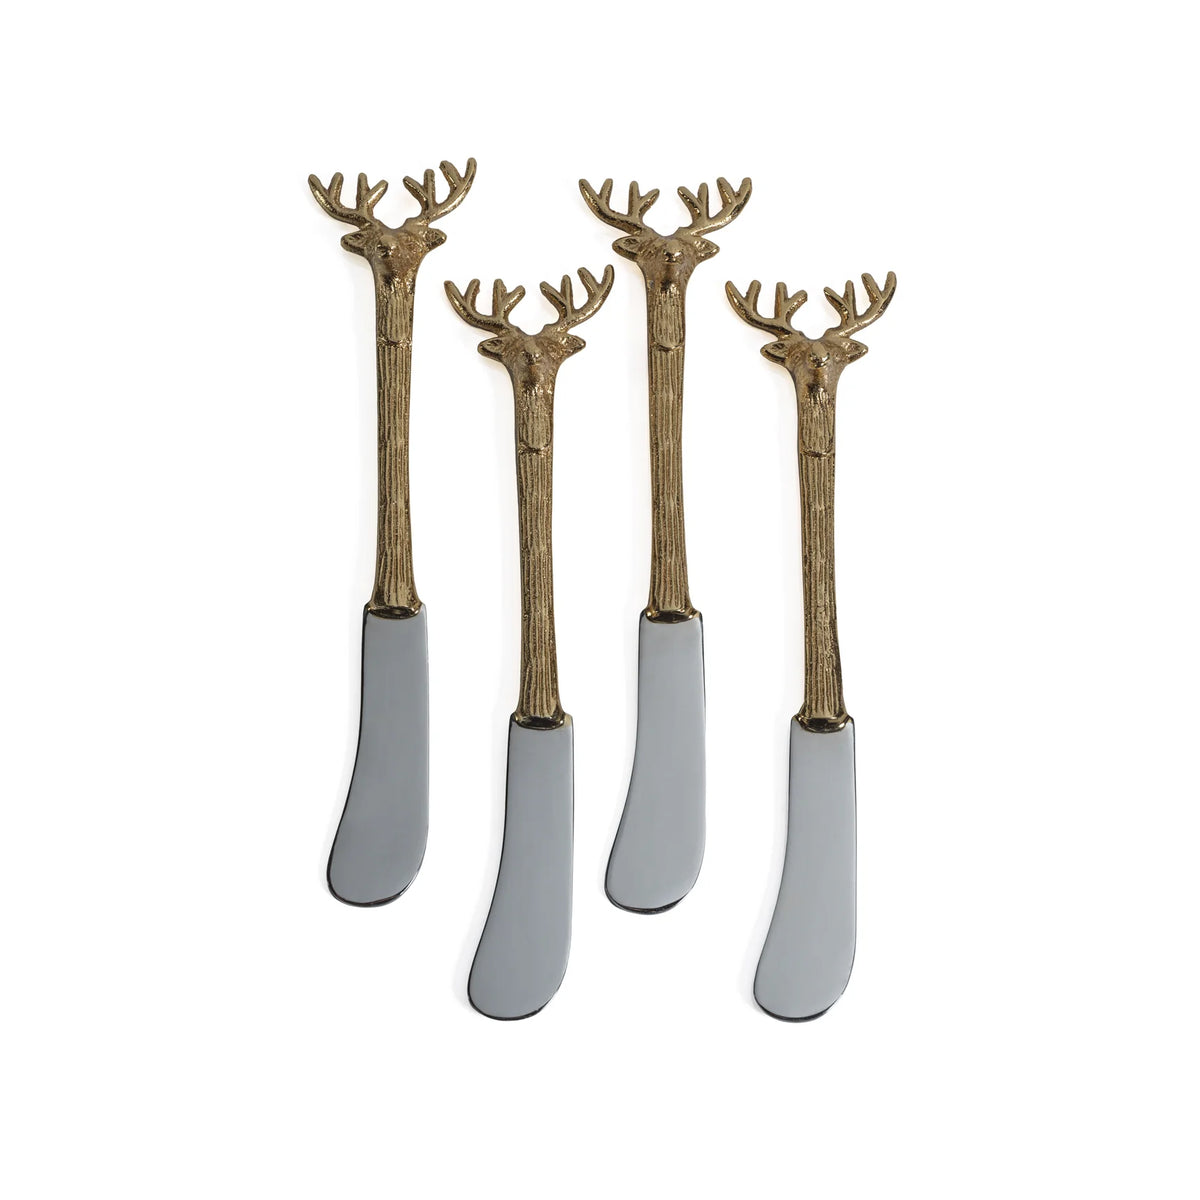 STAG'S HEAD BUTTER KNIVES